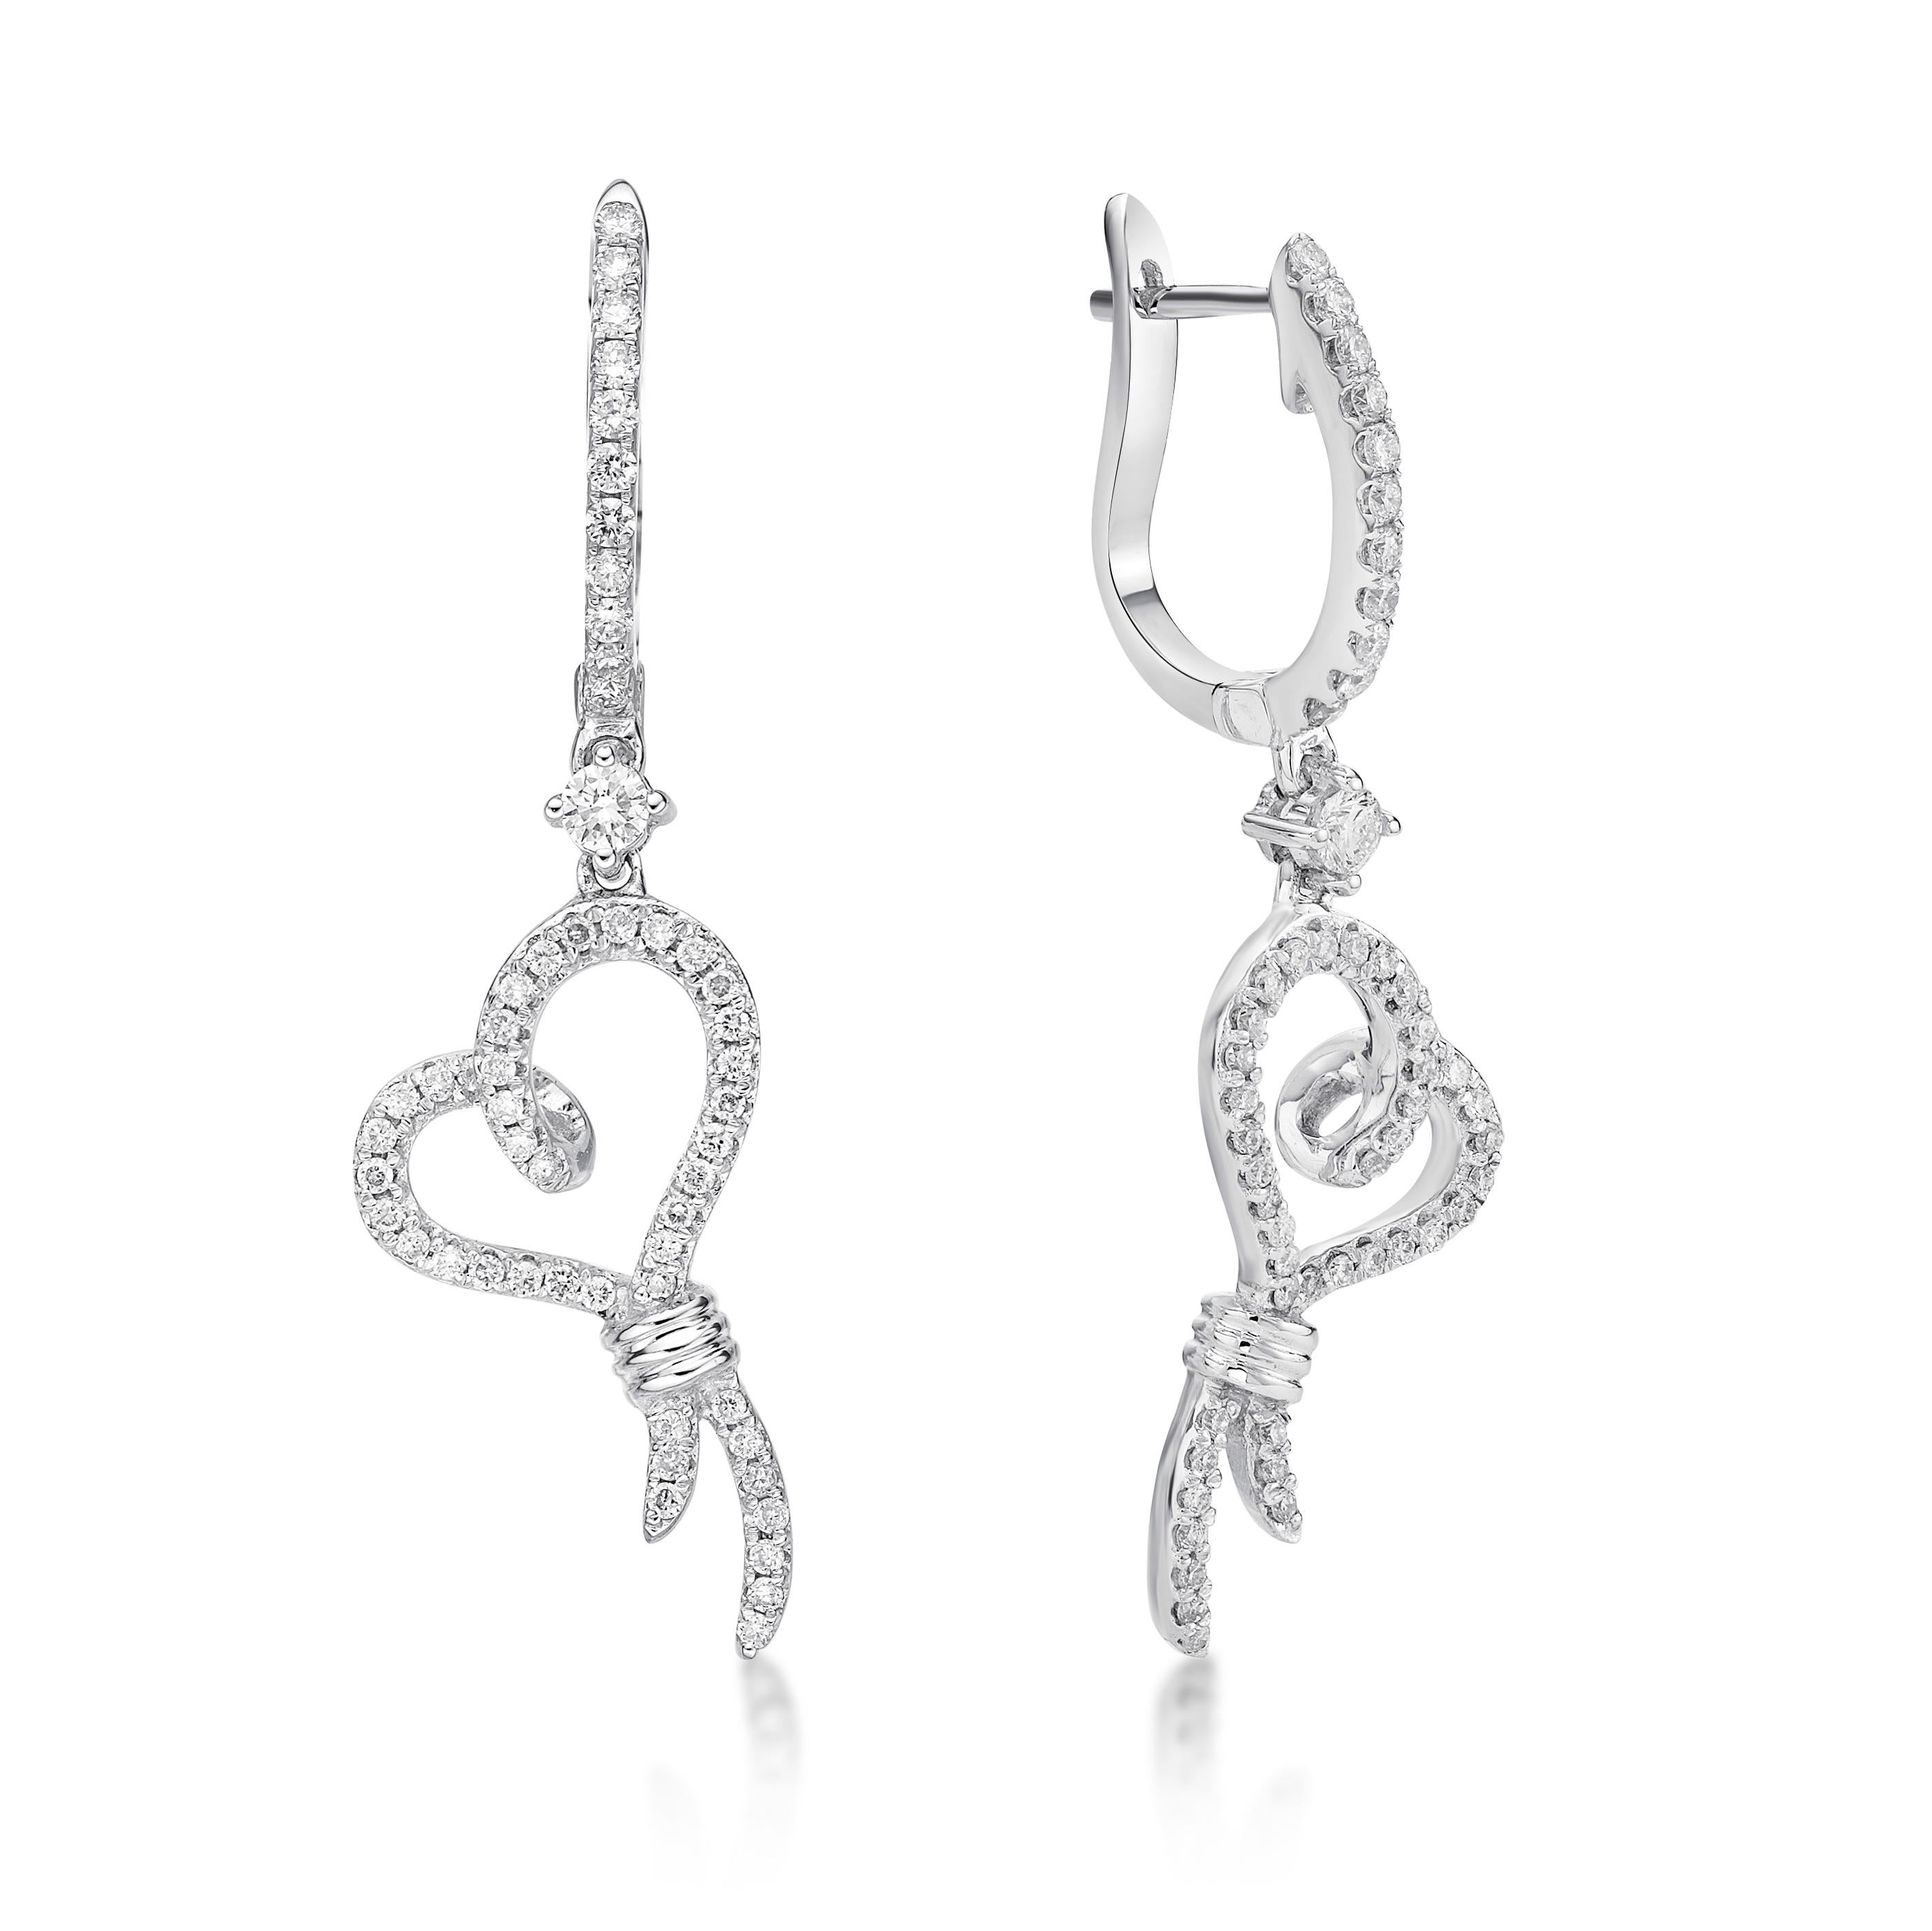 Diamonds are symbols of purity, unity, and love. They absorb and amplify energy, both positive and negative. They are also connected to the energy of wealth and are helpful in attracting abundance and manifesting.

The earring setting with diamond